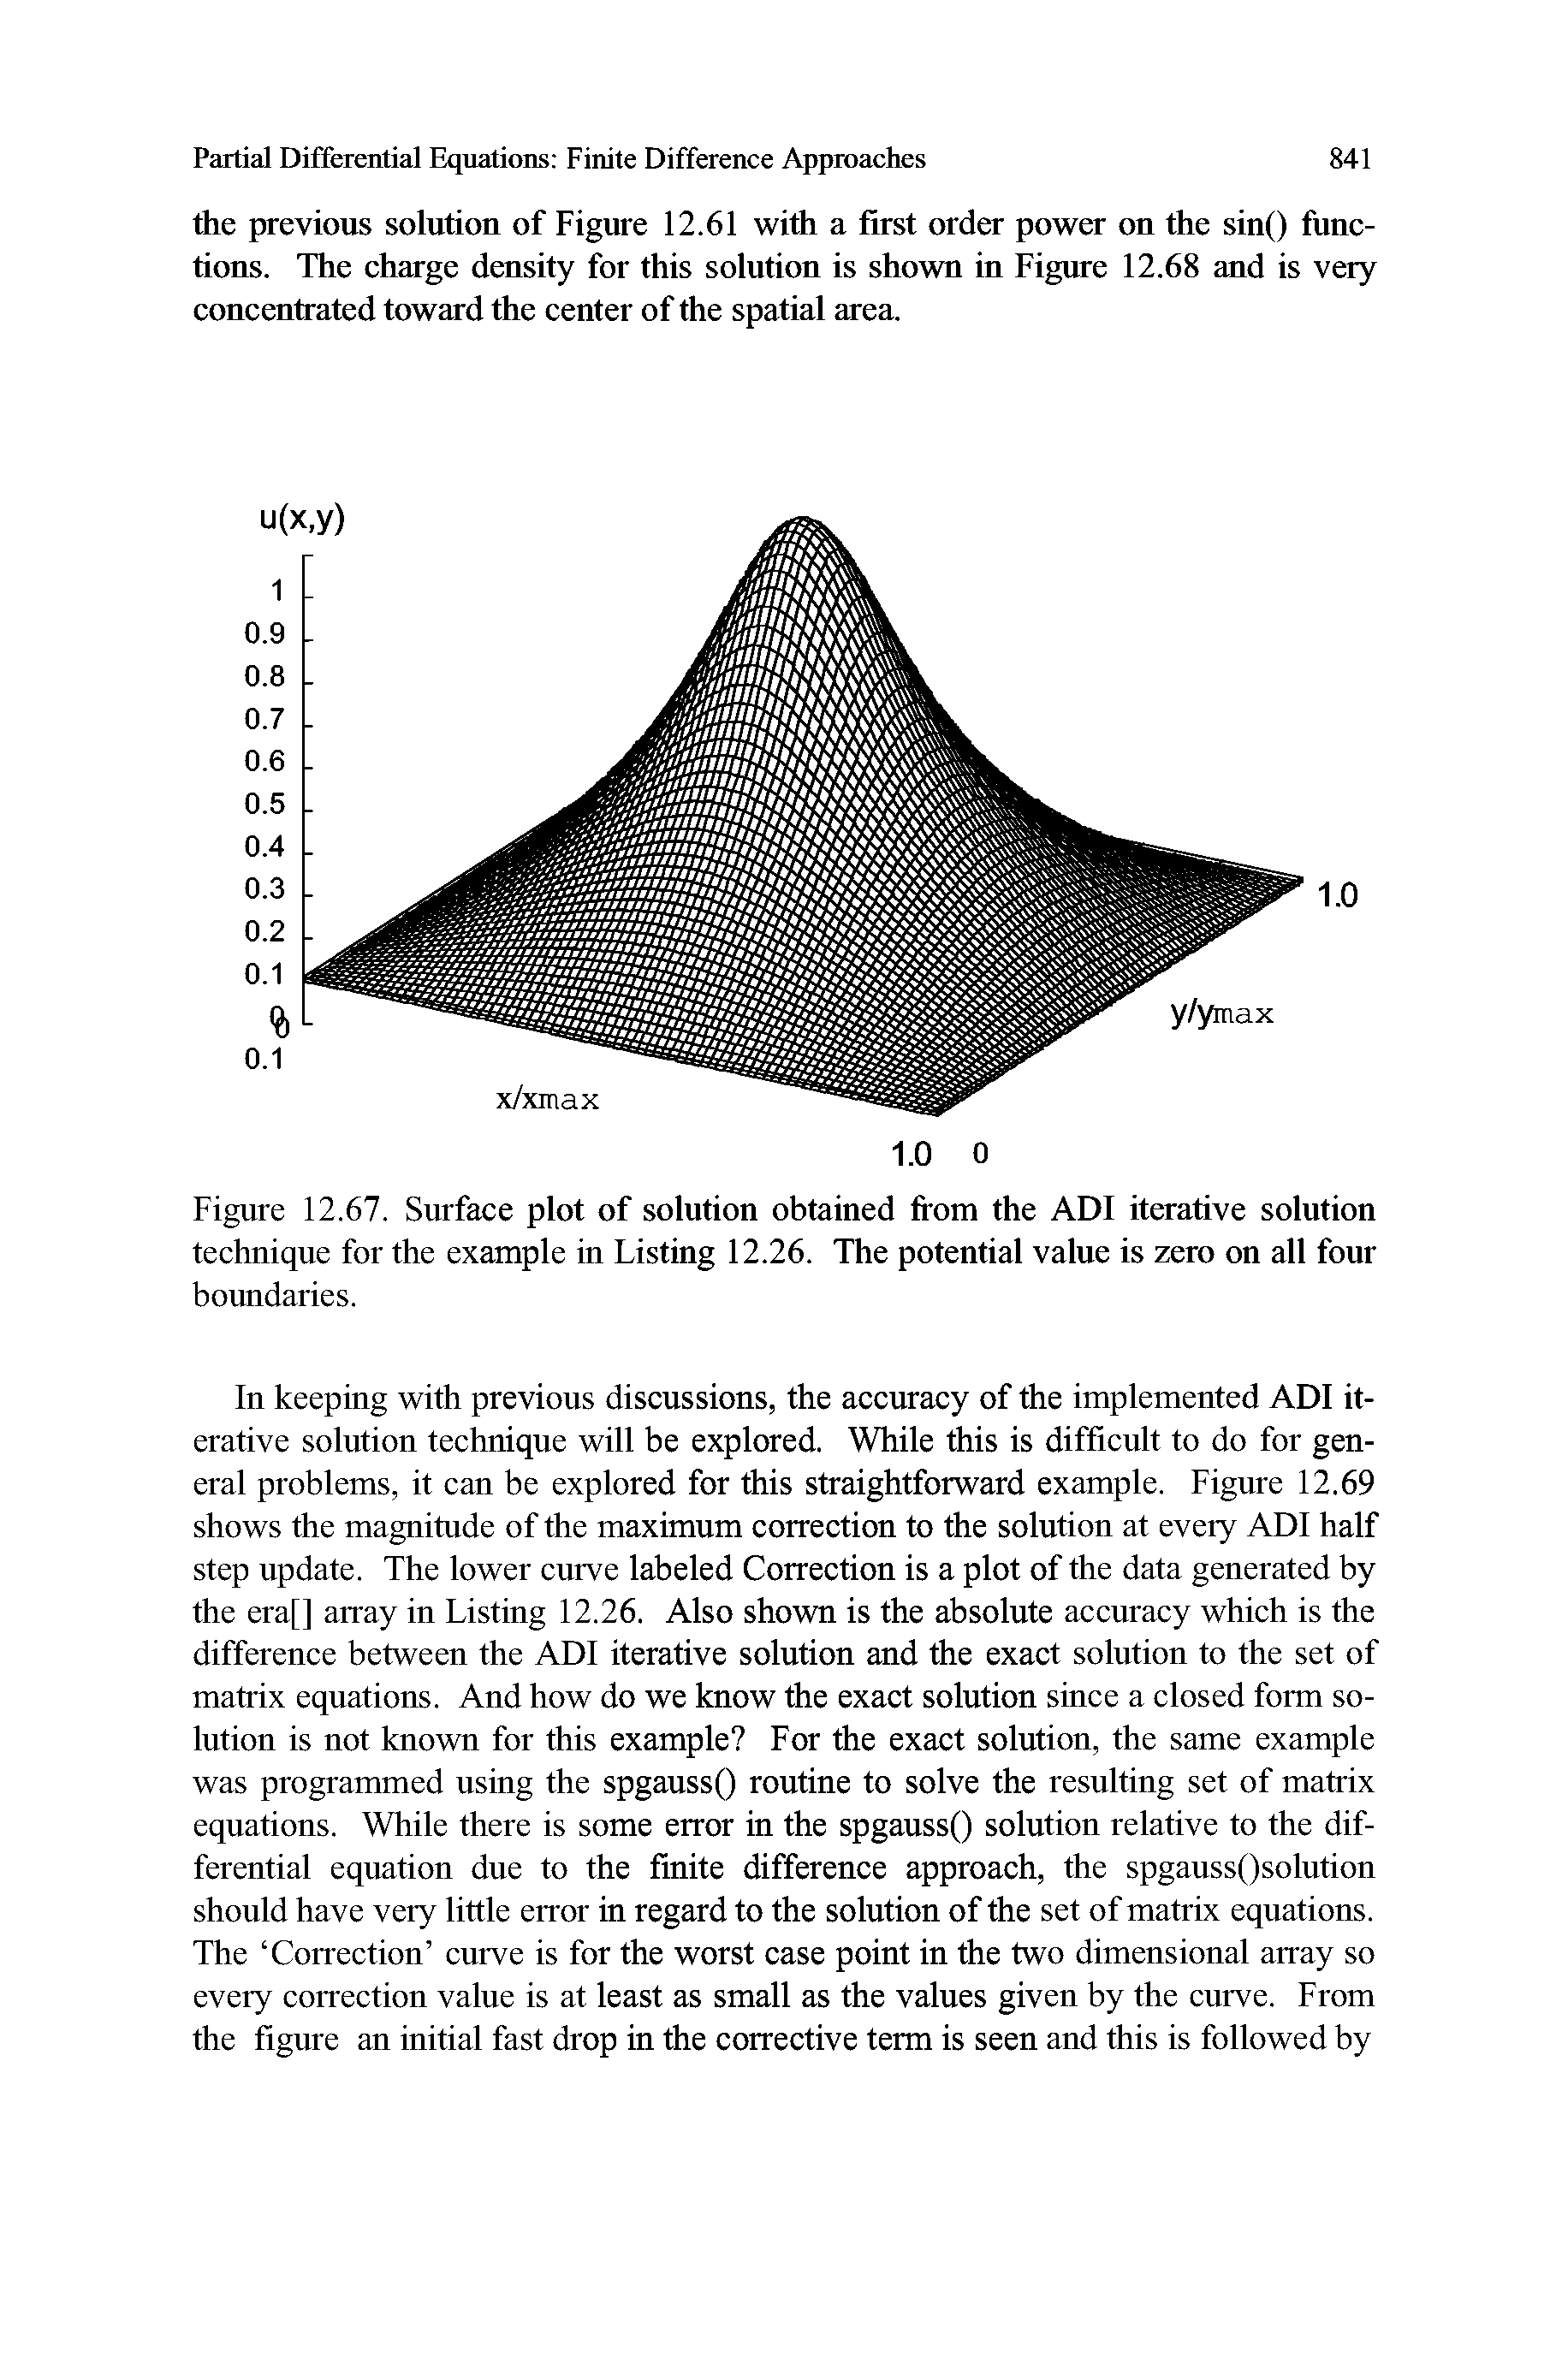 Figure 12.67. Surface plot of solution obtained from the ADI iterative solution technique for the example in Listing 12.26. The potential value is zero on all four boundaries.